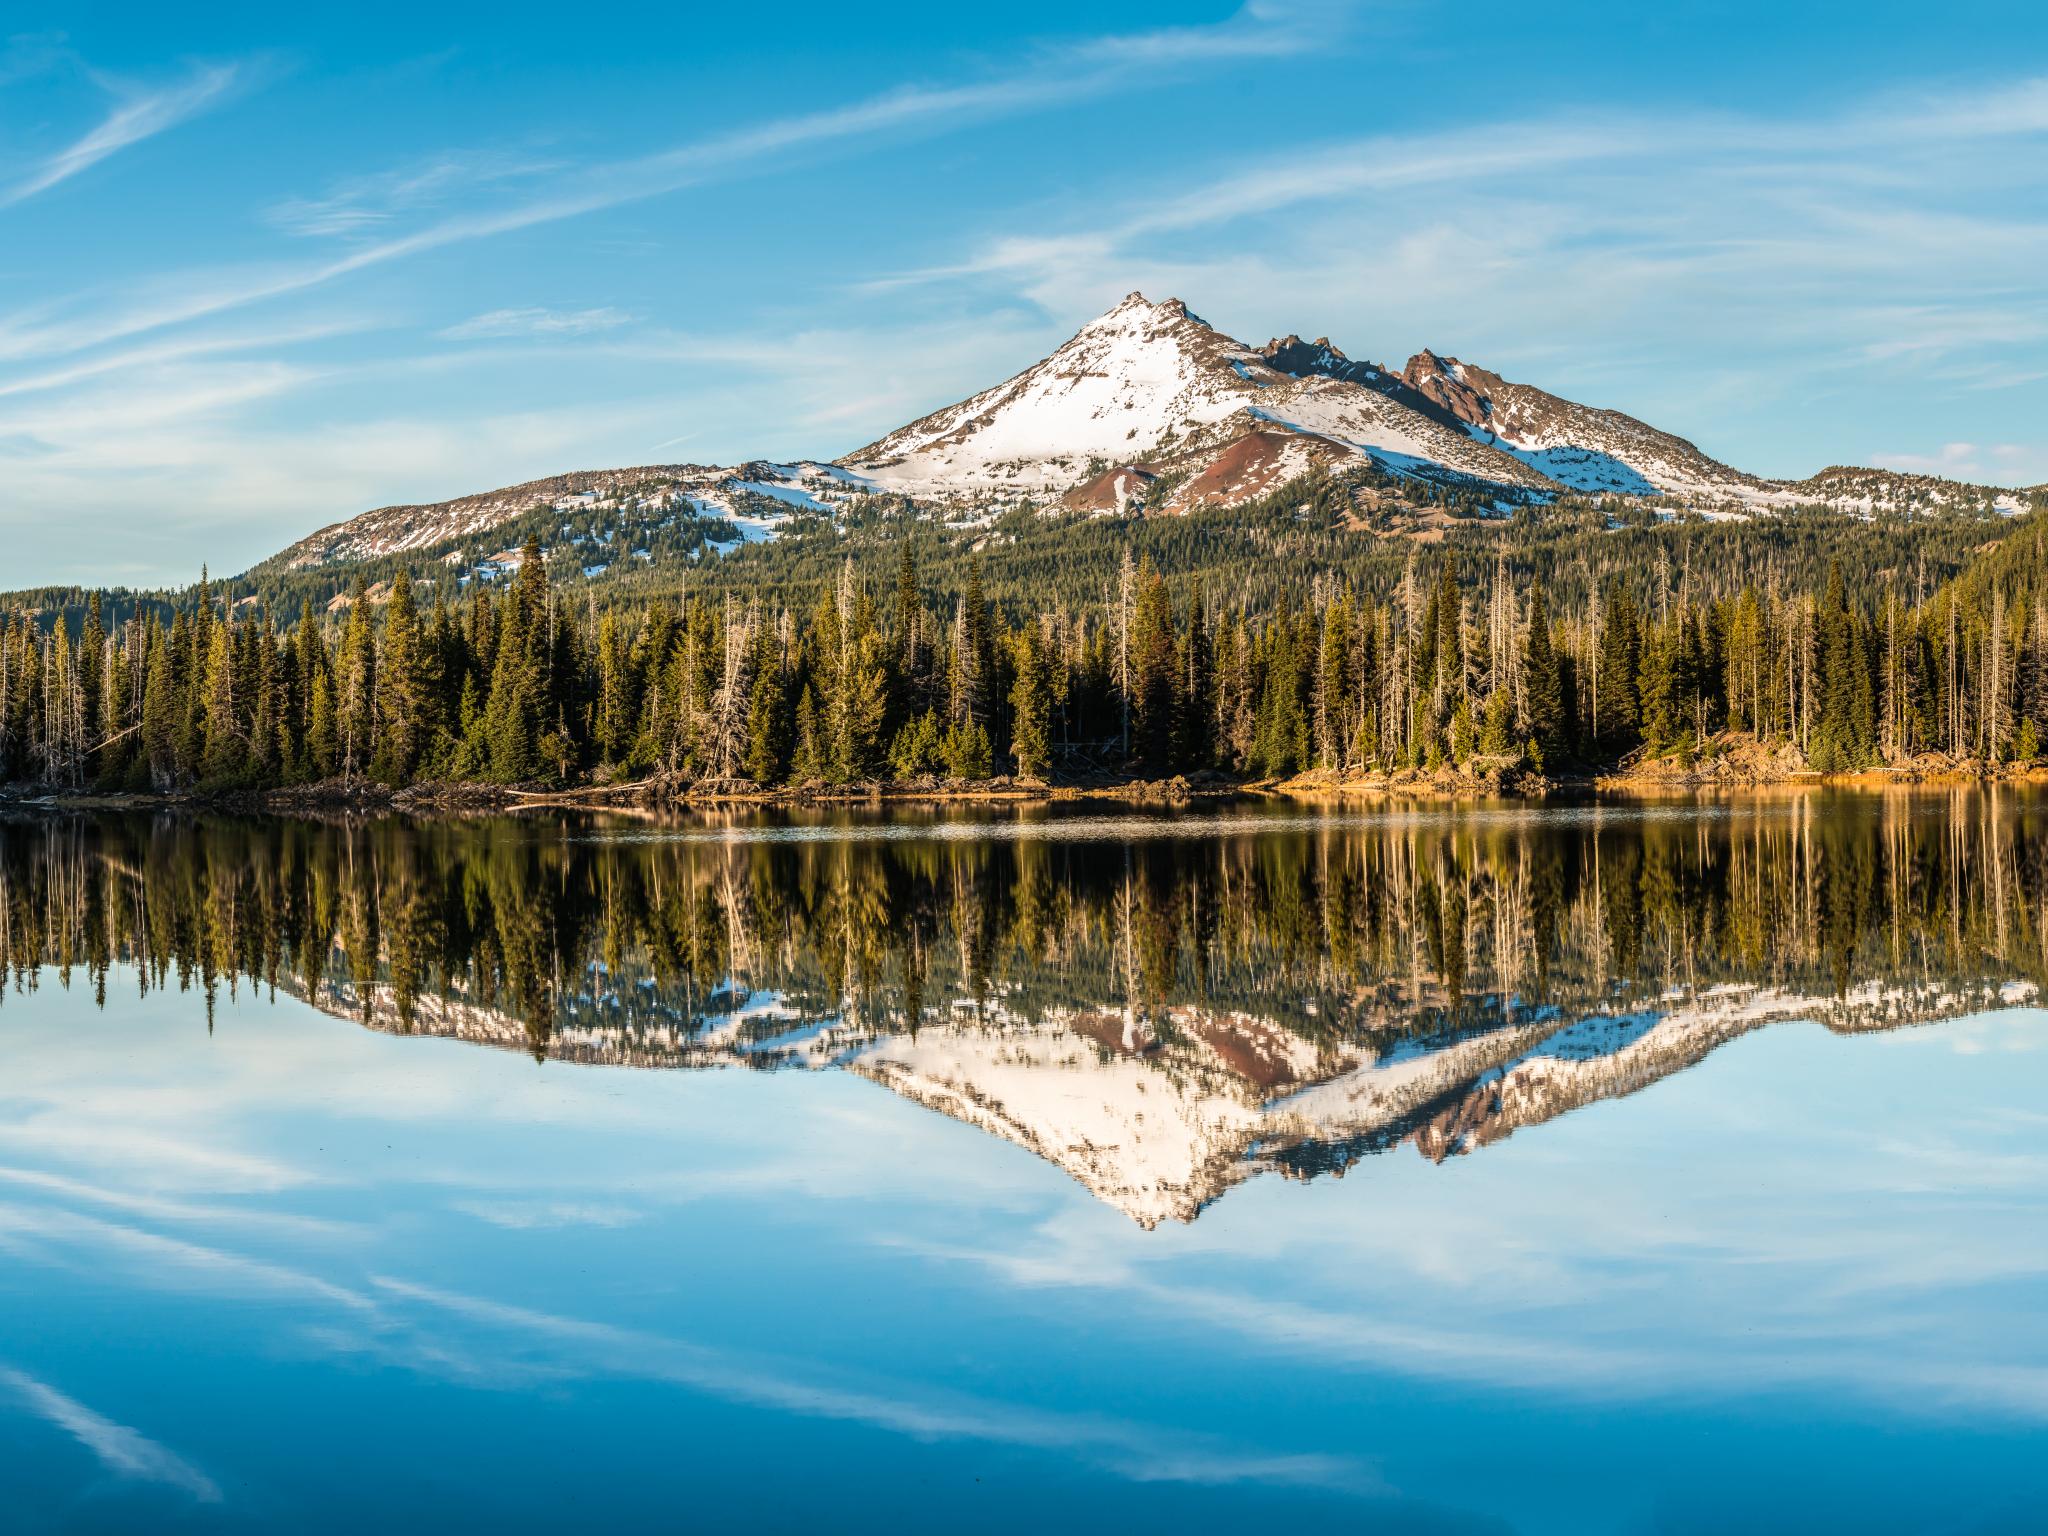 Portland to Bend, Oregon: Two Scenic Routes to Drive – Around the World L